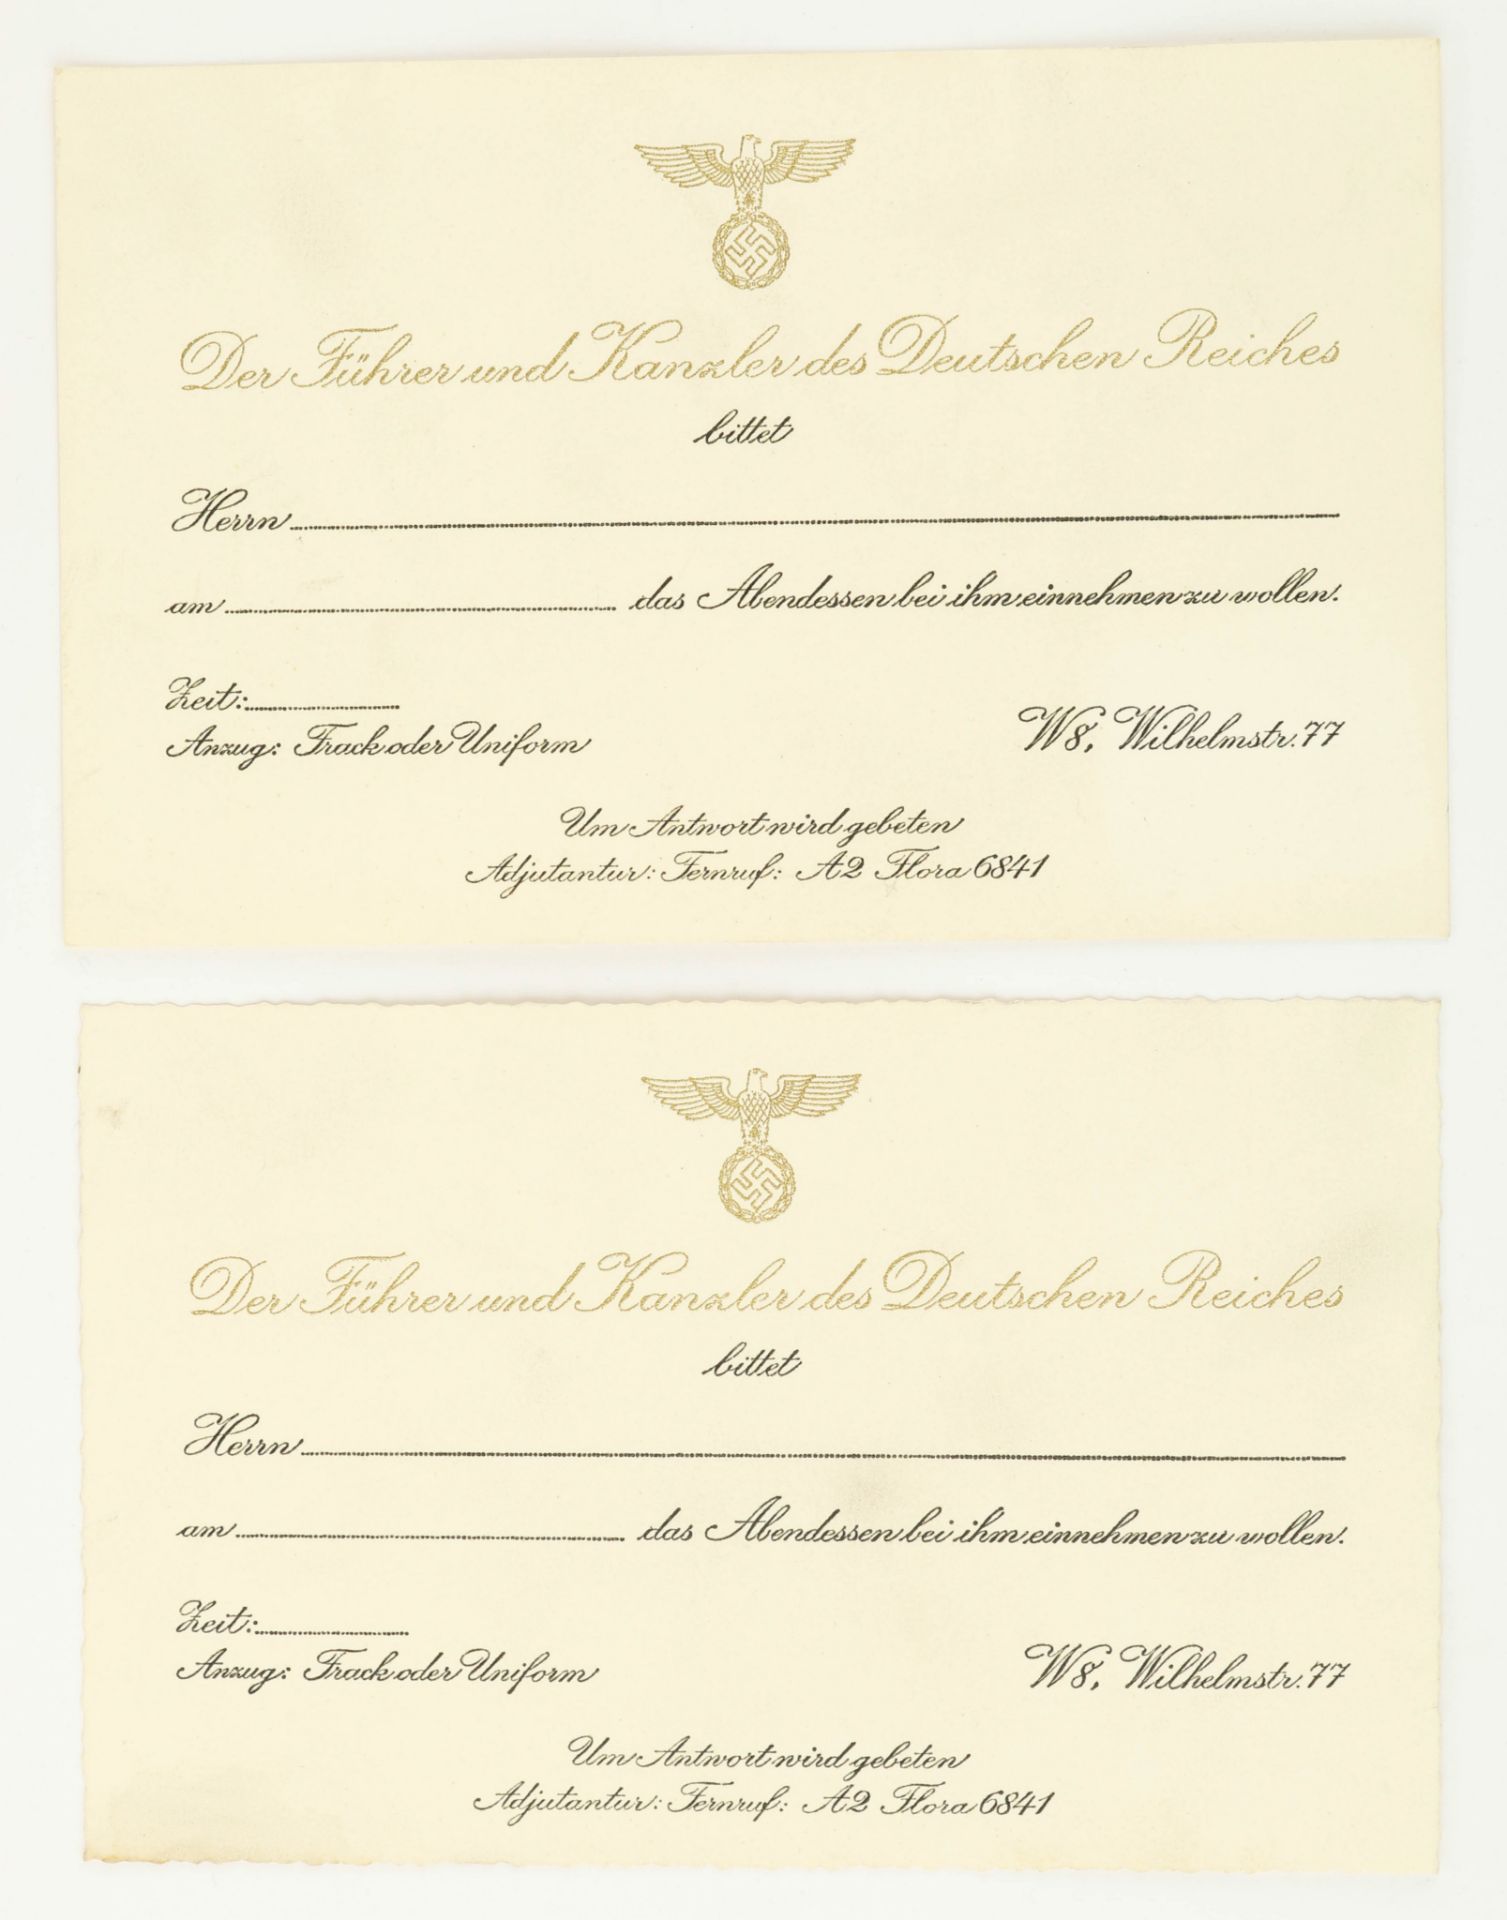 INVITATIONS TO DINE WITH ADOLF HITLER (2)